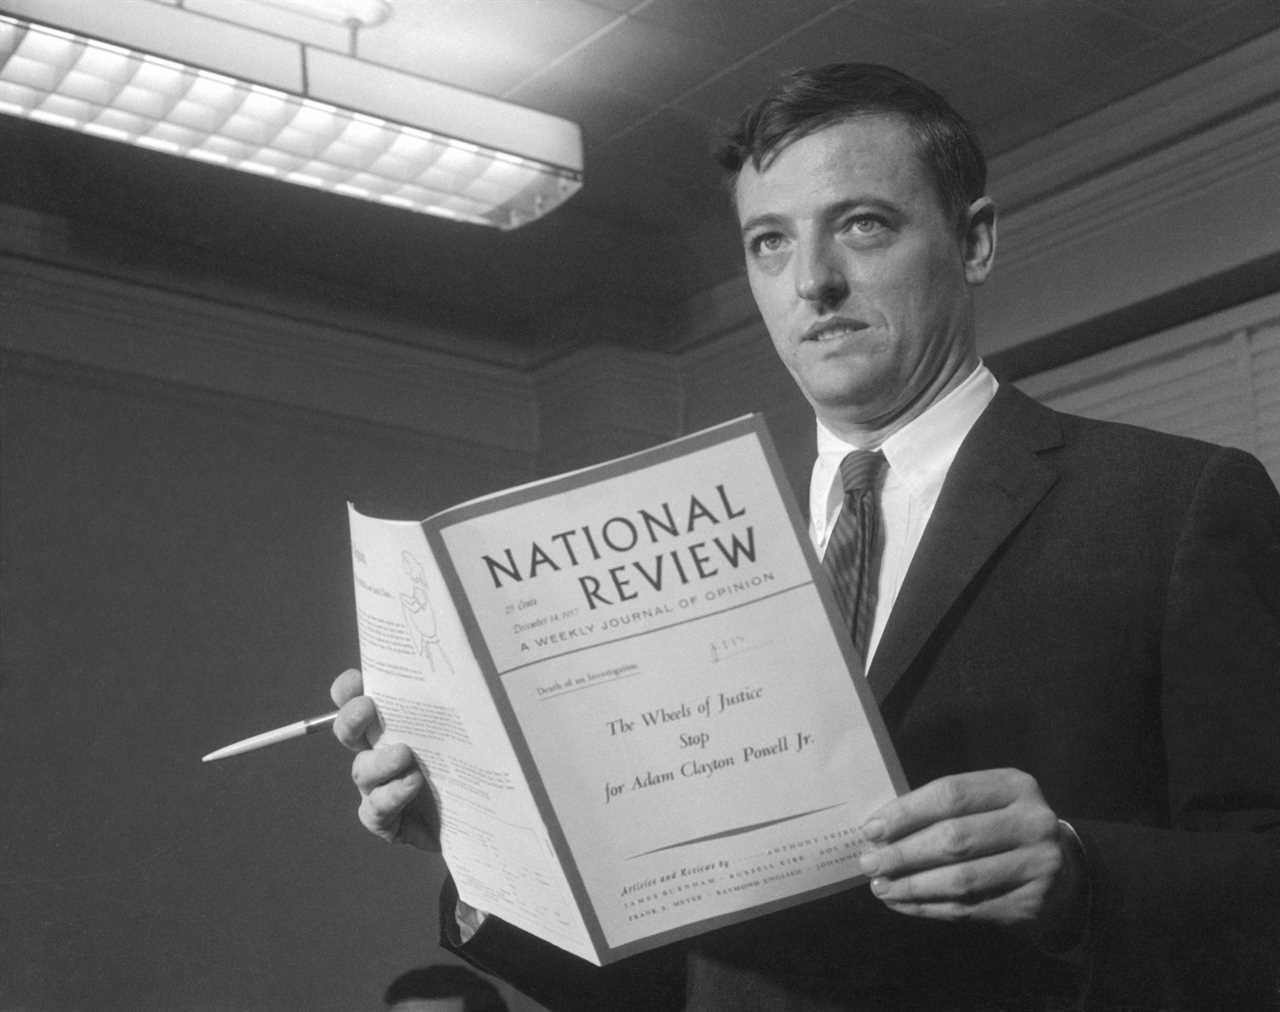 The Truth About William F. Buckley & the John Birch Society